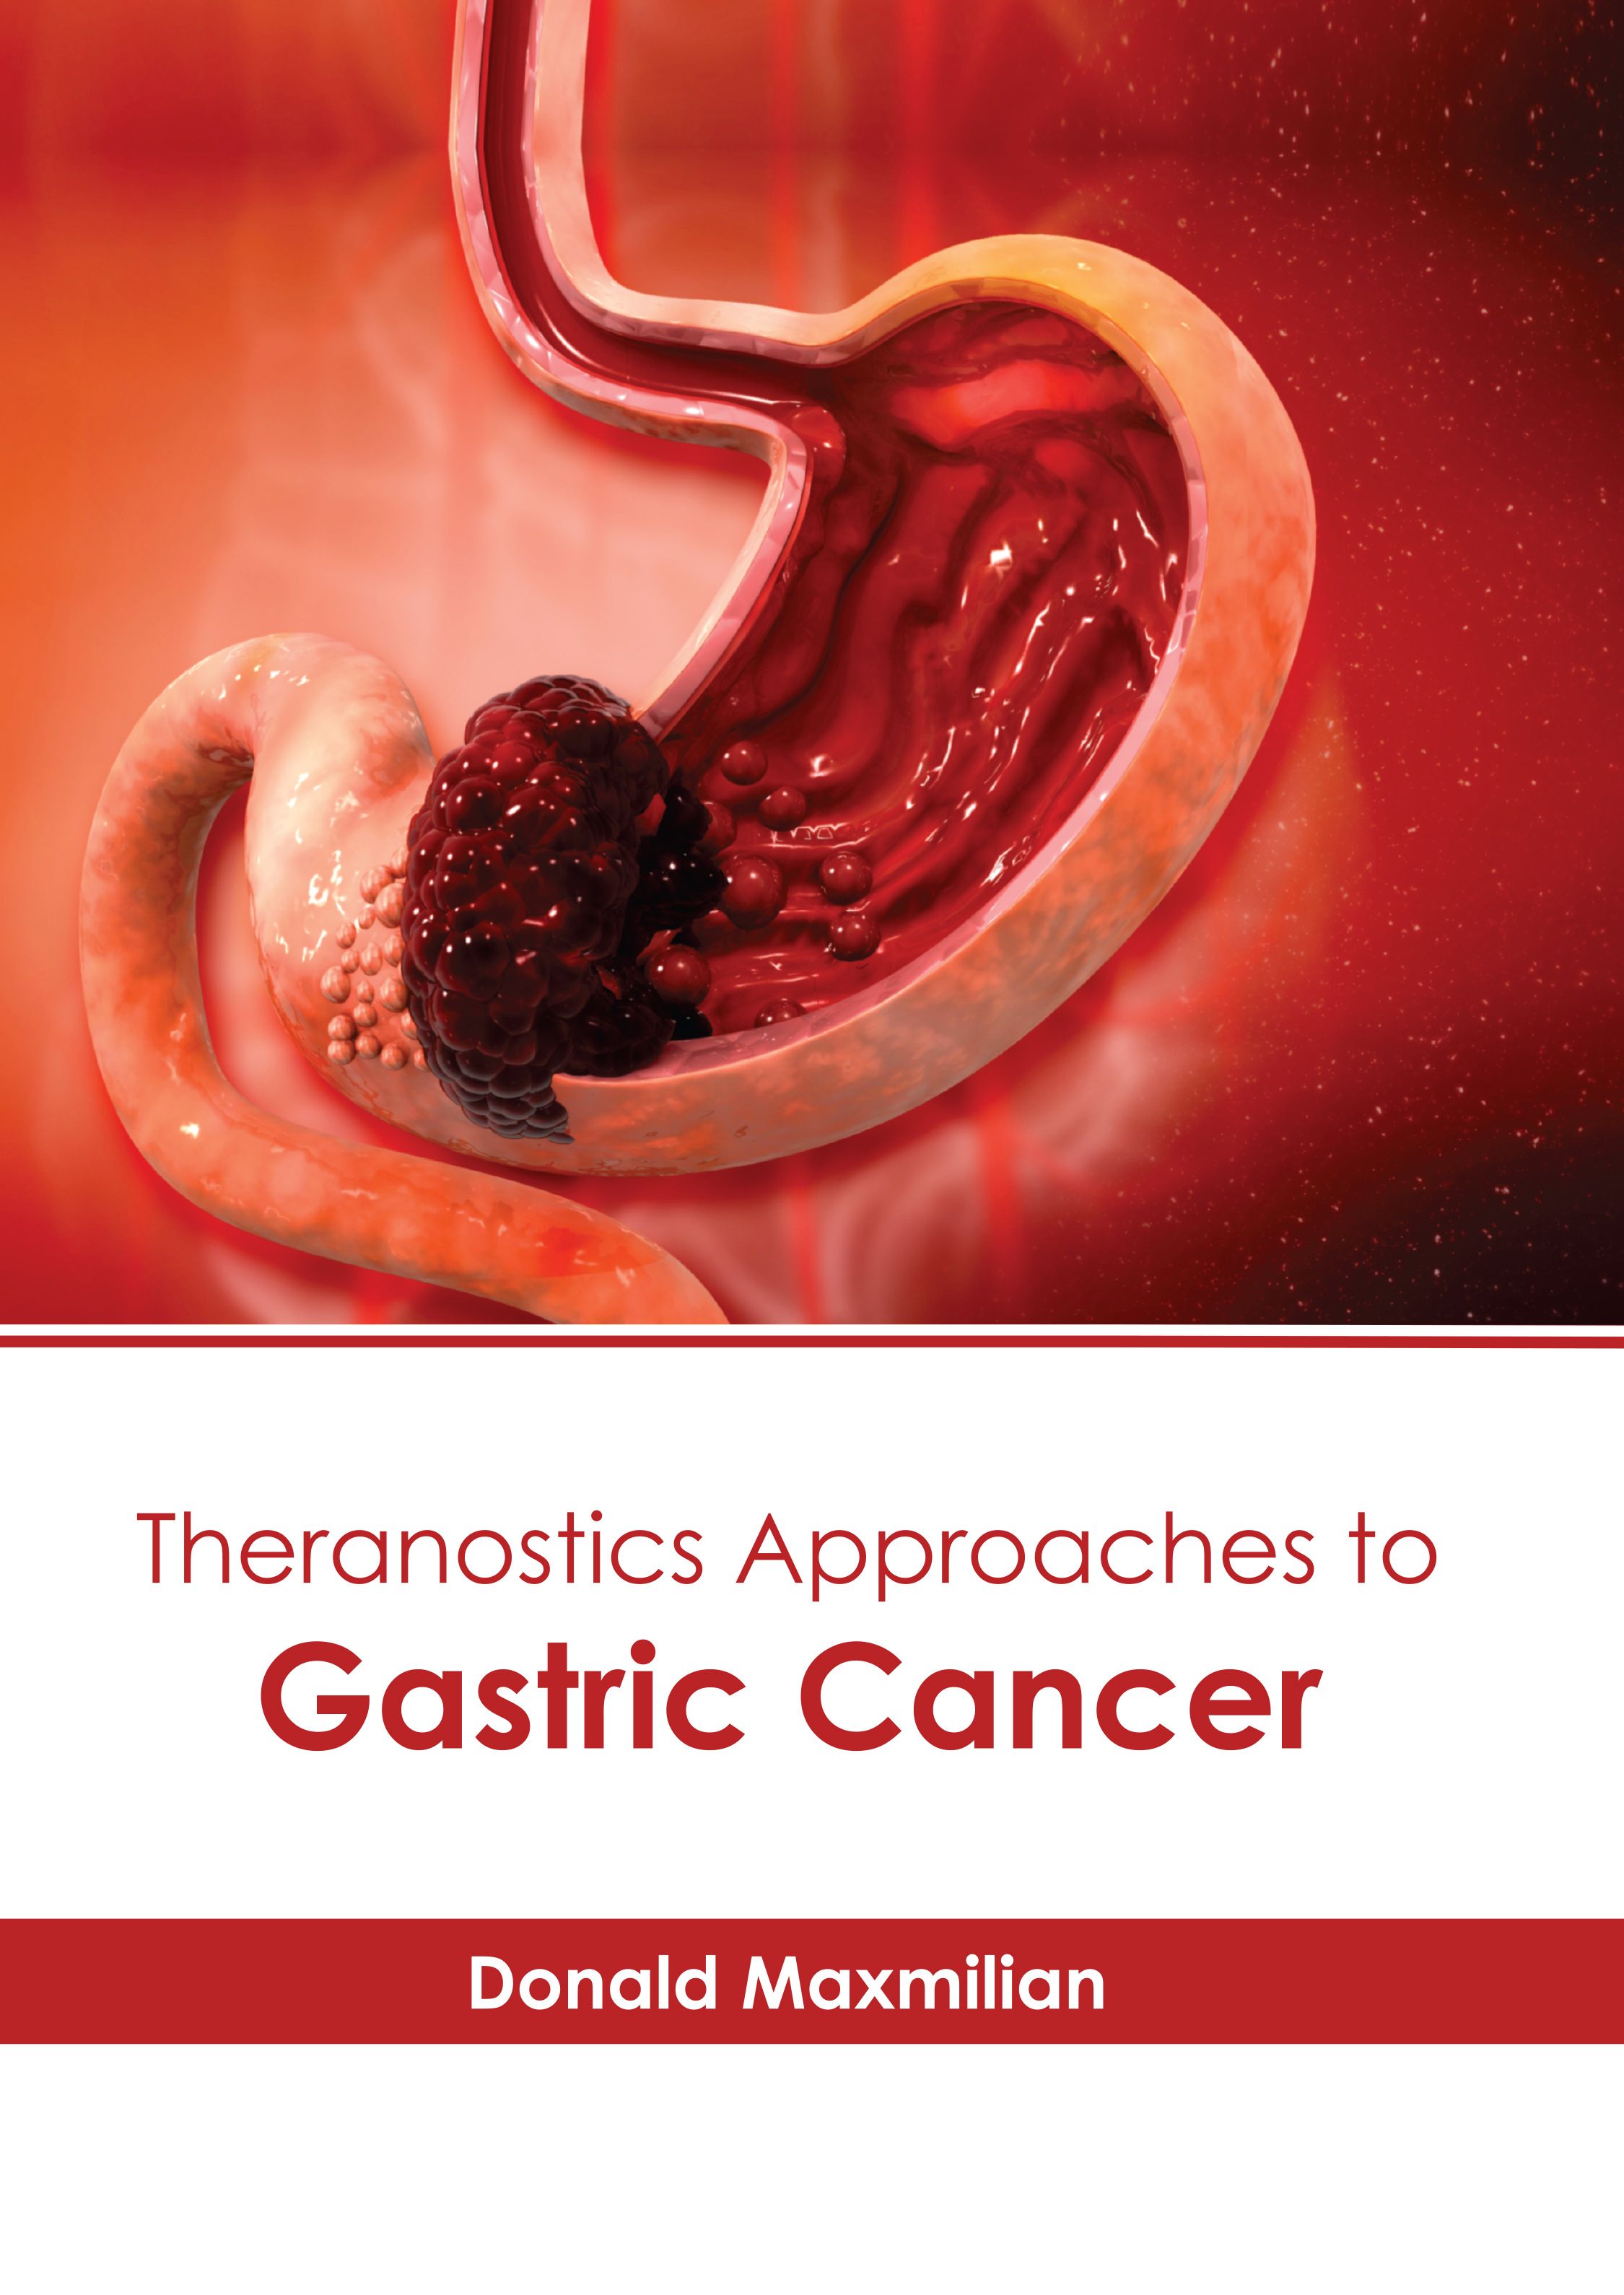 THERANOSTICS APPROACHES TO GASTRIC CANCER